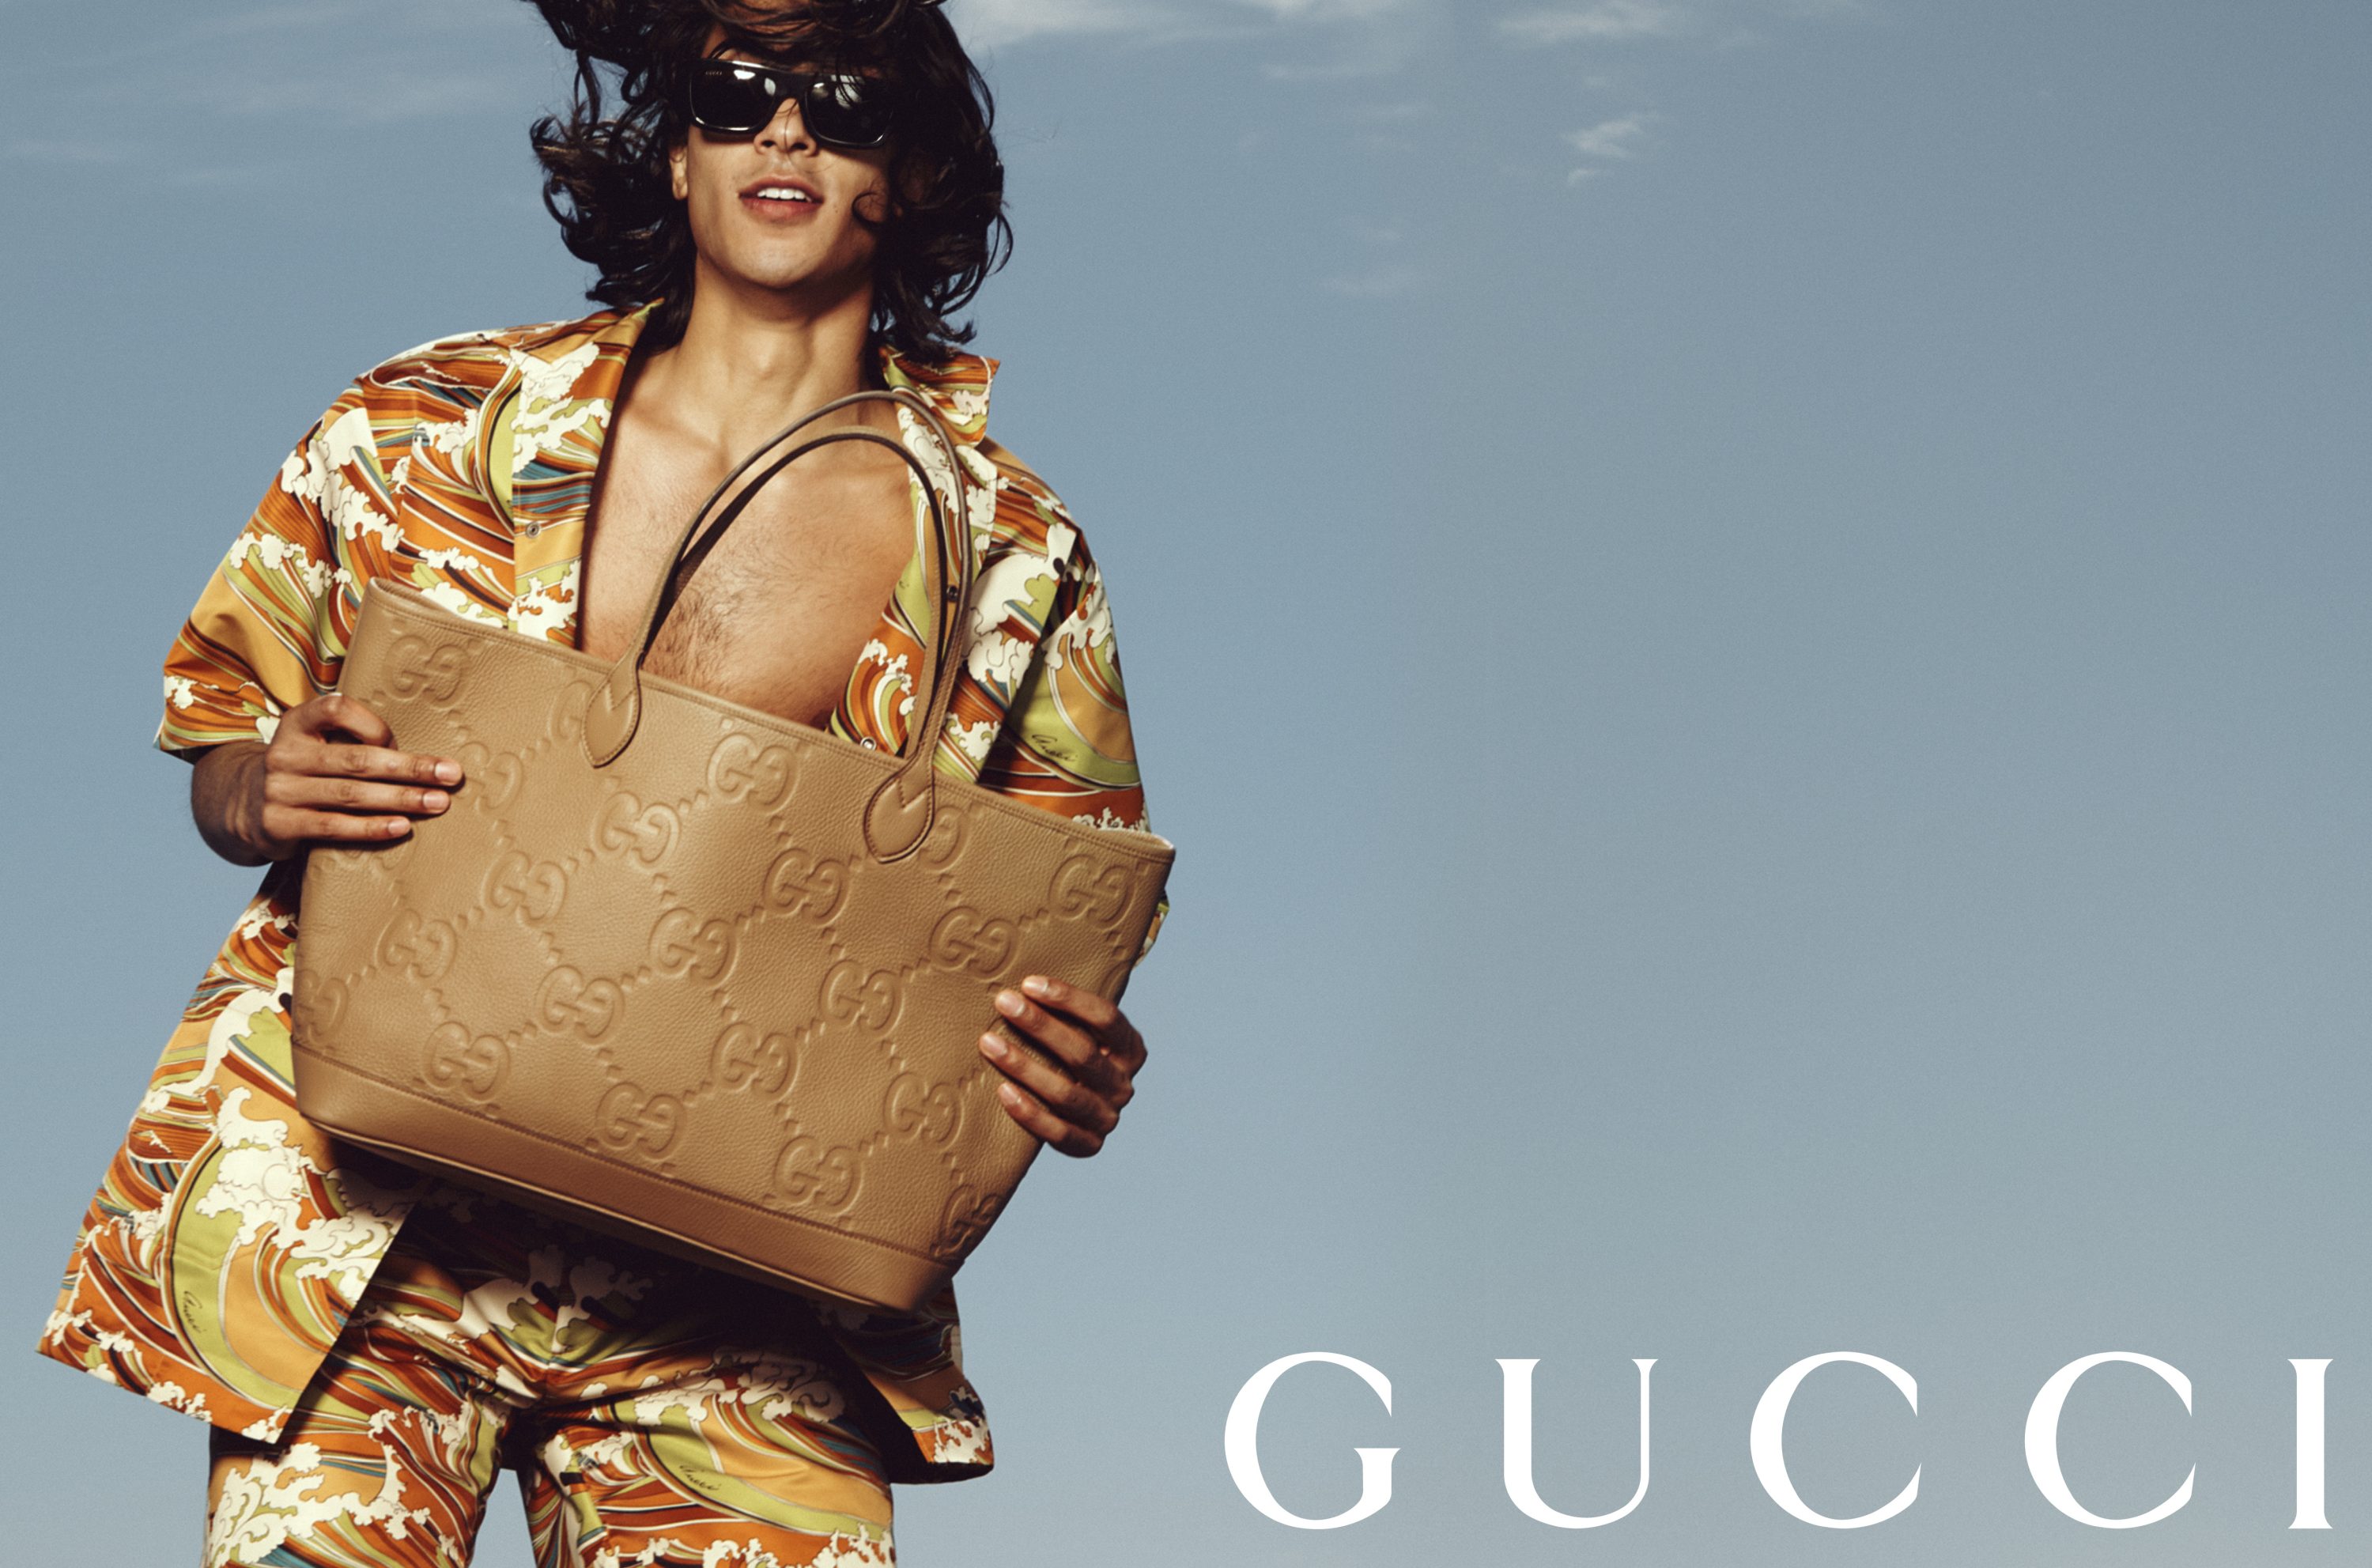 Gucci shares her 2023 summer wishlist! Discover what's in her